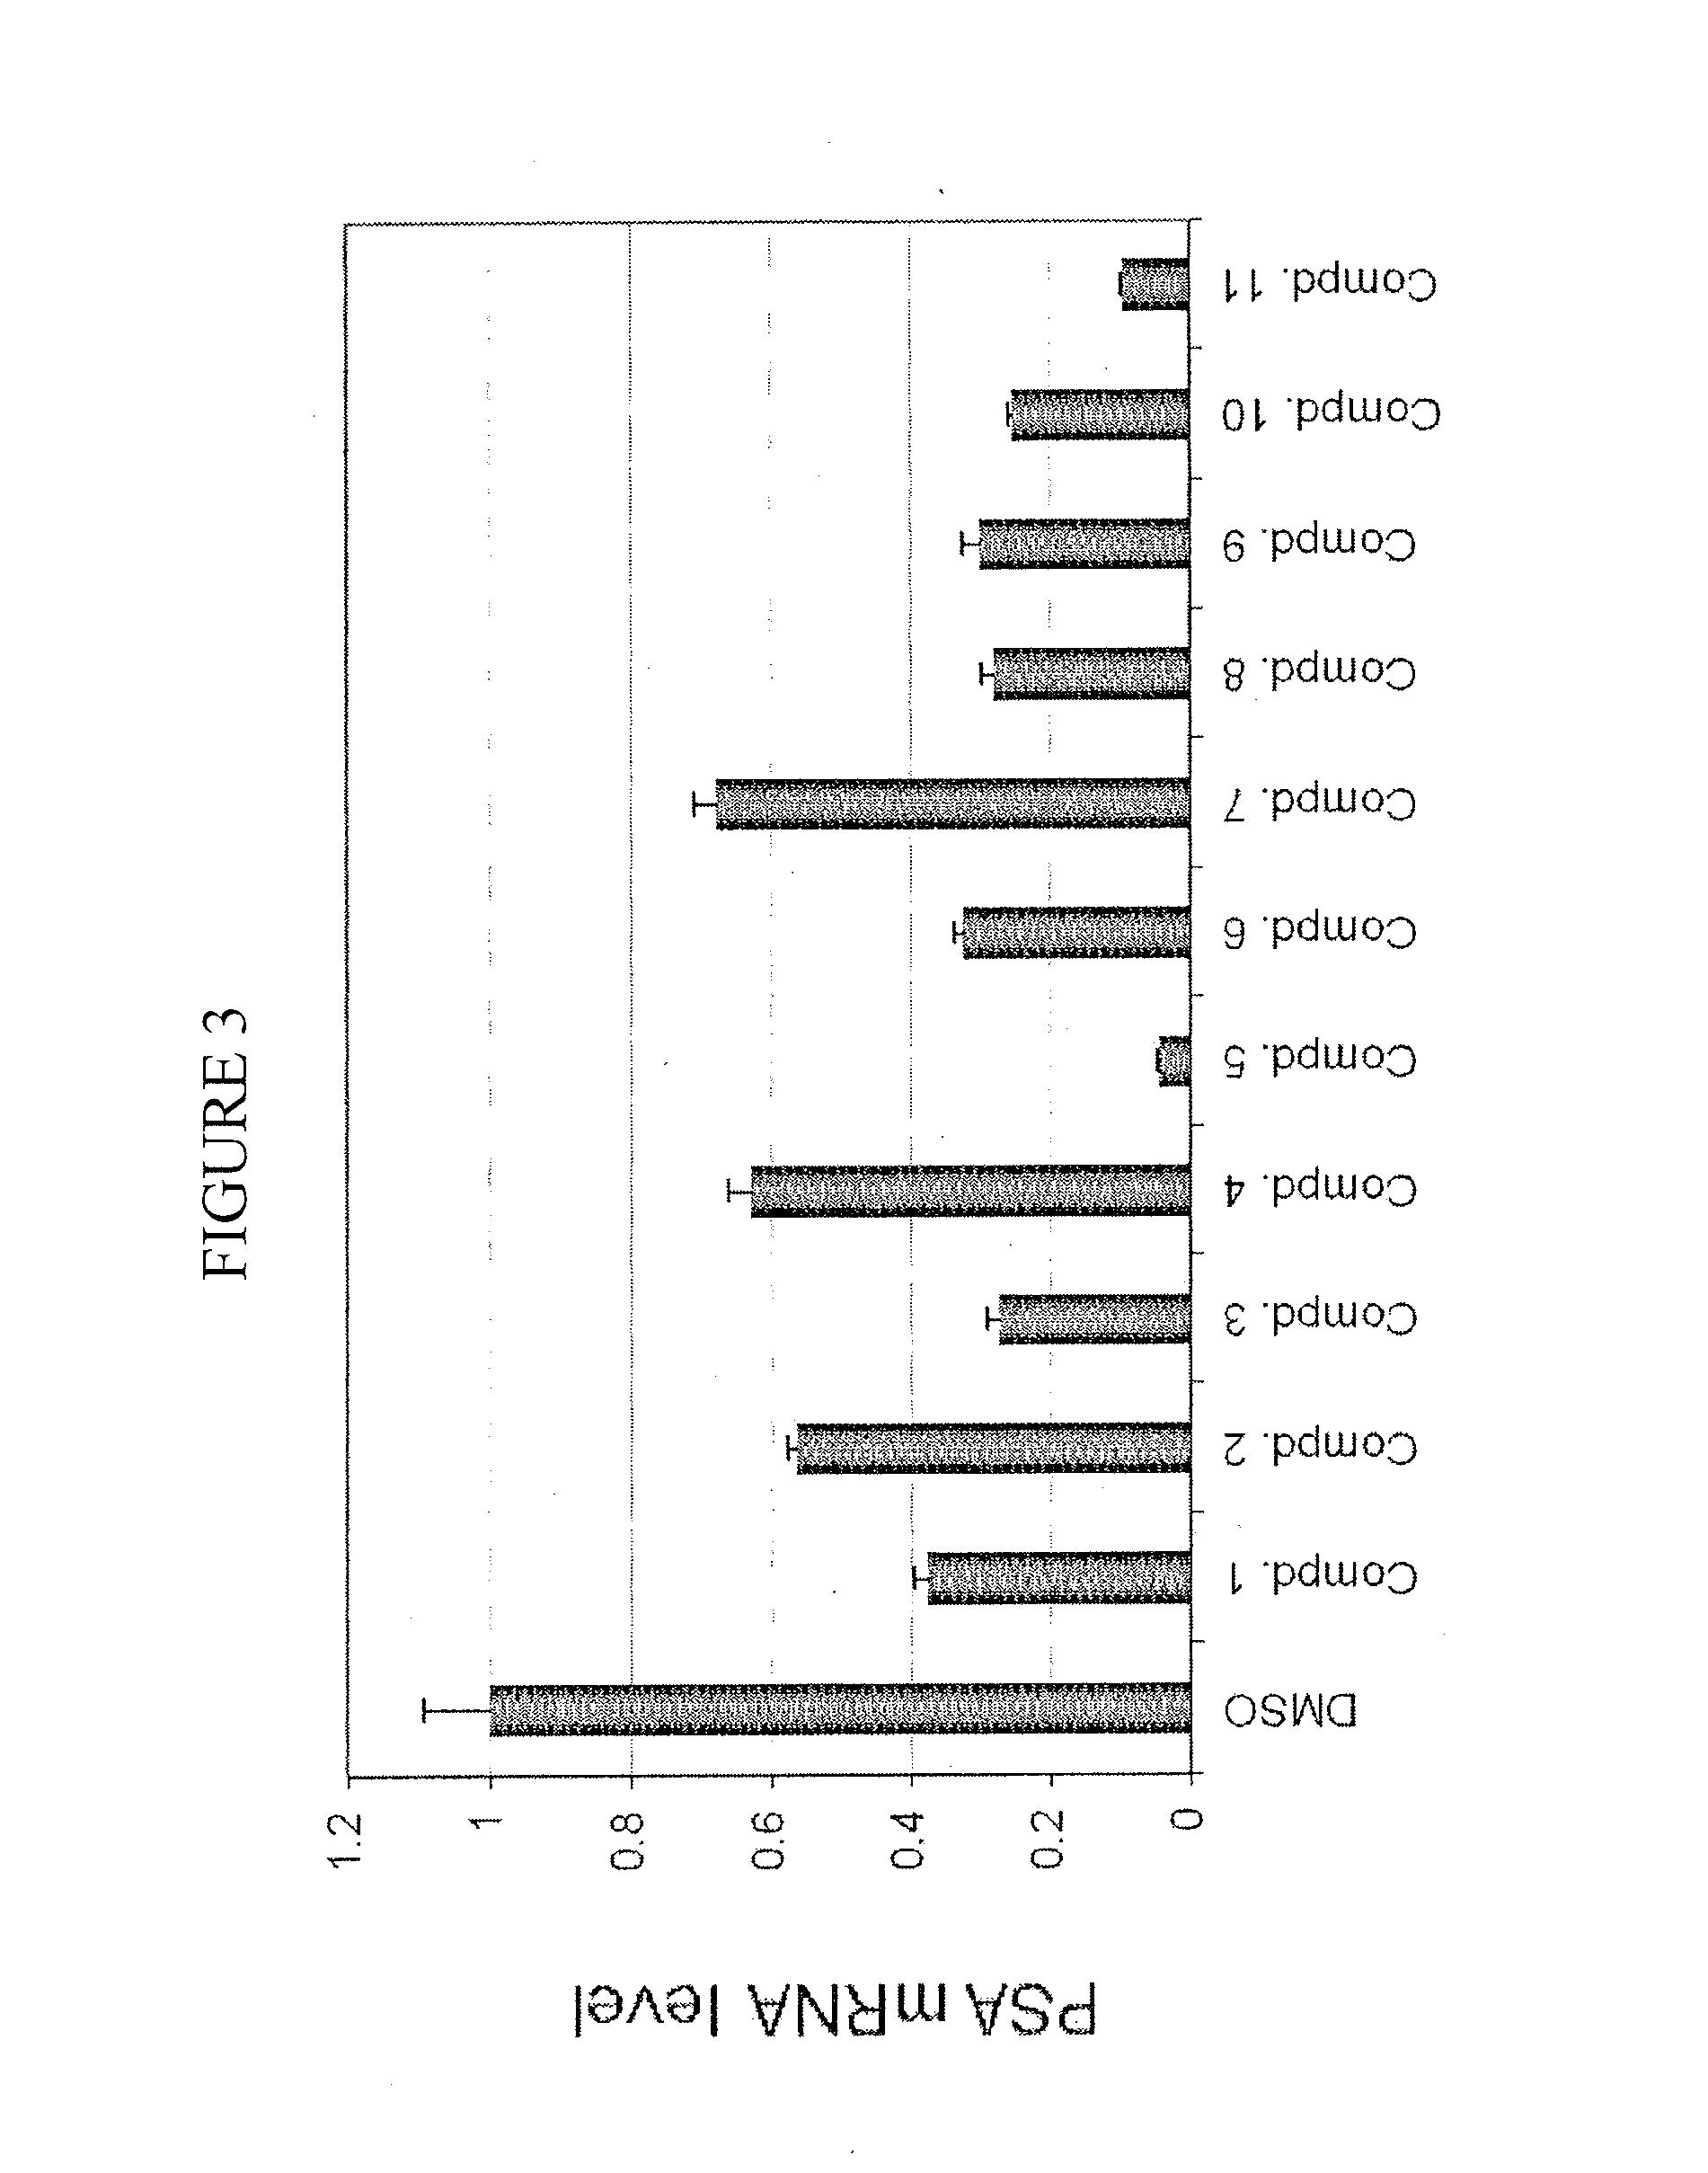 Nuclear receptor modulators and their use for the treatment and prevention of cancer